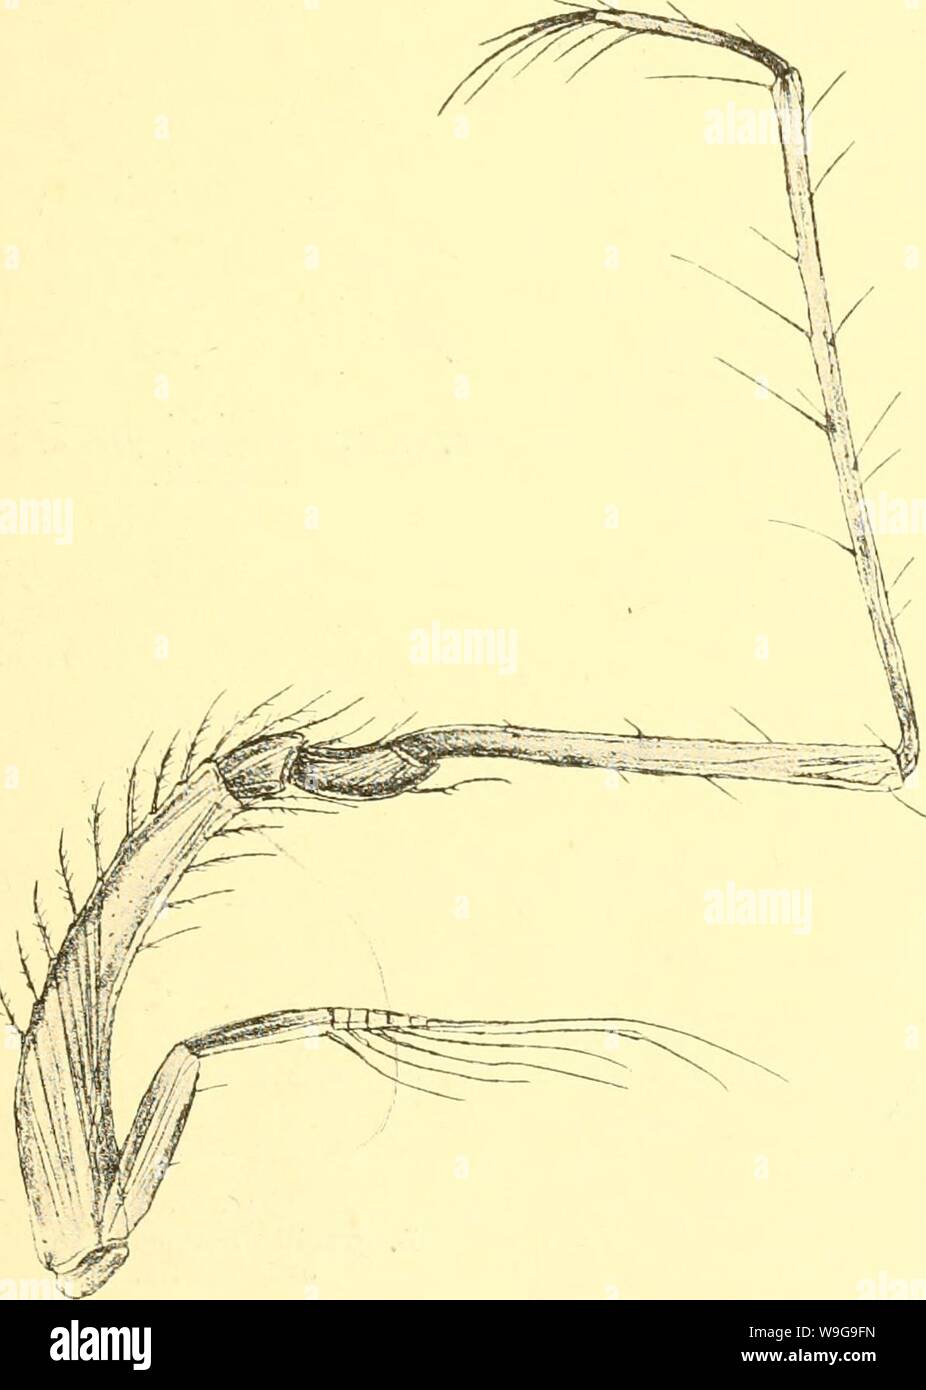 Archive image from page 150 of Cumacea (Sympoda) (1913). Cumacea (Sympoda)  cumaceasympoda00steb Year: 1913 ( Cumacea: 11. Diastylidae, 7. Leptostylis 127 9. L. productus Norm. 1879 L. produda. A. M. Norman in: Ann. nat. Hist., ser. 5 V.3 p. 65 | 1912 L. productus, T. Stebbing in: Ann. S. Afr. Mus., v.0 p. 153. Pseudorostral lobes short, blunt, slightly upturned. Carapace short, as broad as long, nearly smooth, antero-lateral margin strongly serrate. Telson not longer than 6' pleon segment, nor more than half the 5'', without lateral spines, apical pair rather large. Peduncle of uropods near Stock Photo